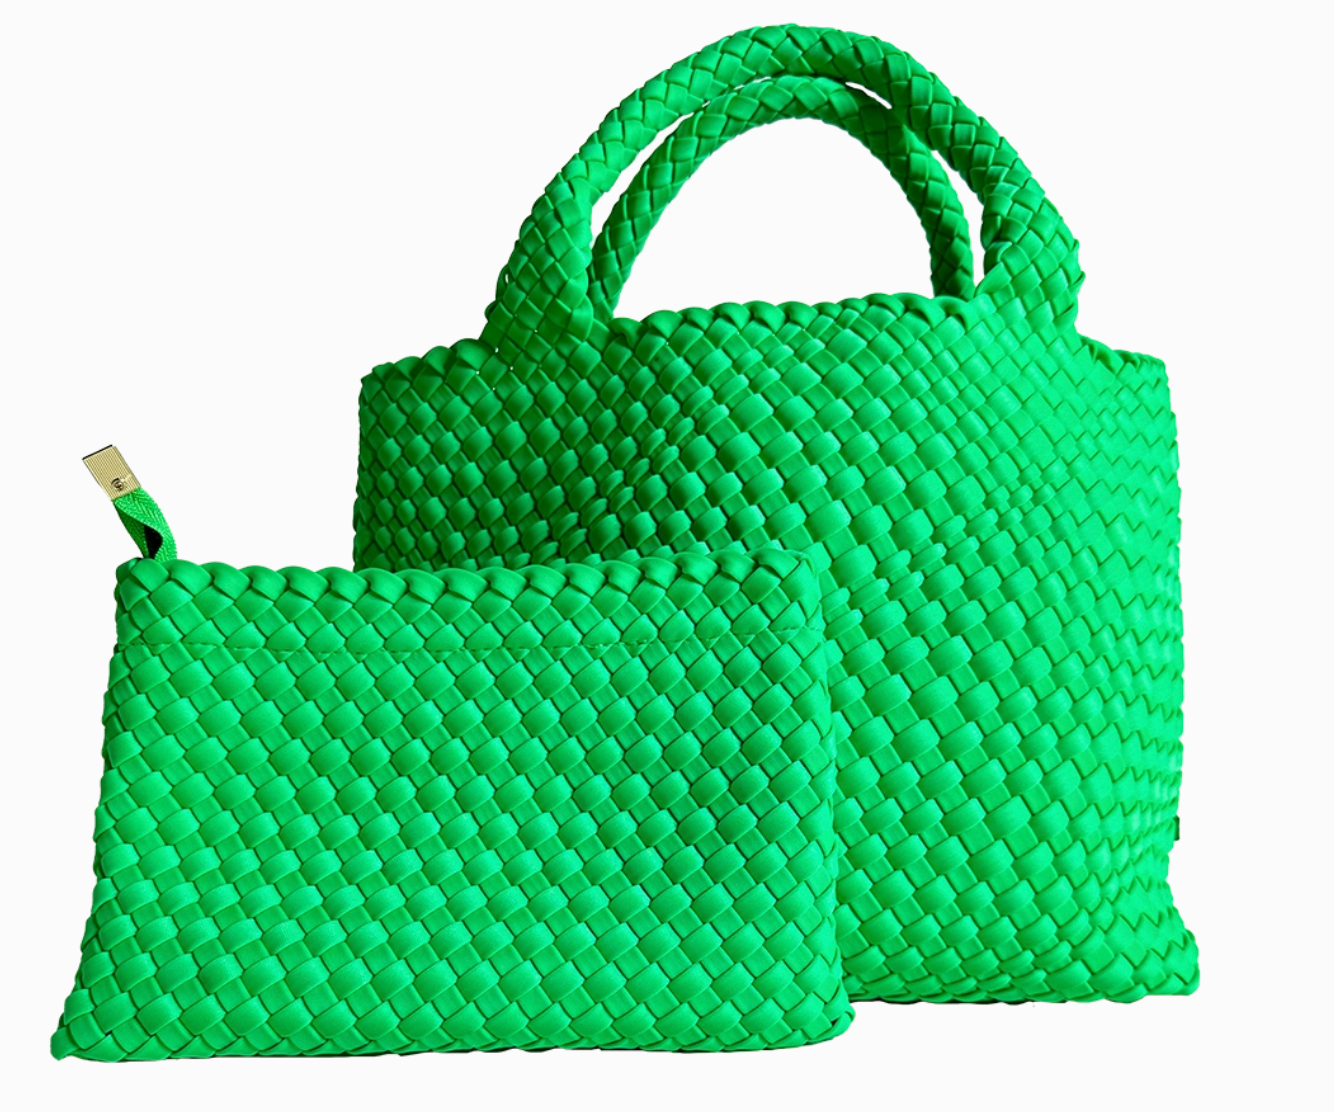 Large Neoprene Totes with pouch - various colors!